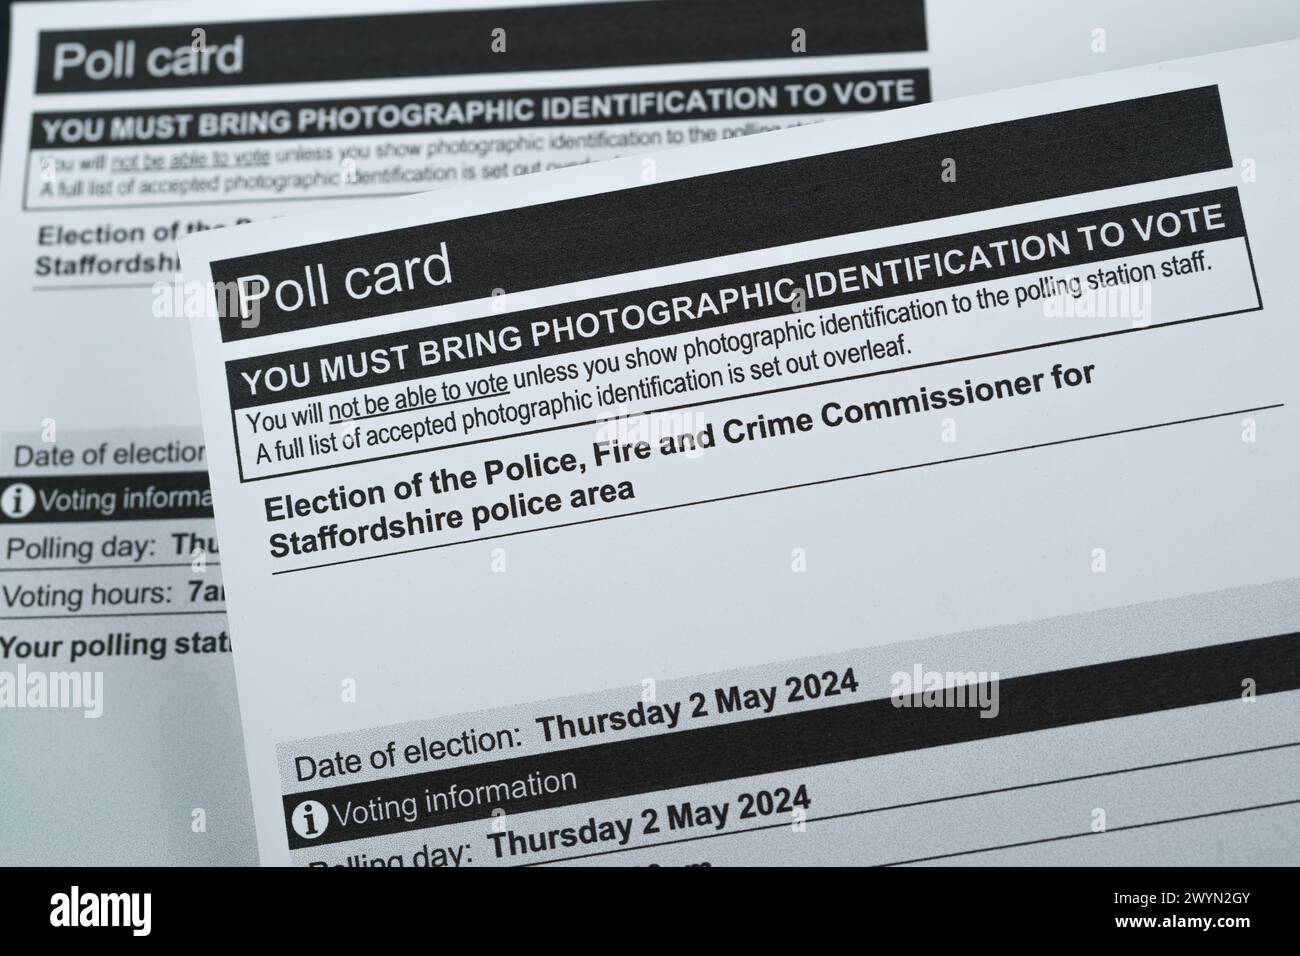 Poll cards for Election of the police Fire and Crime Commissioner for Staffordshire police area. Stafford, United Kingdom, April 7, 2024 Stock Photo